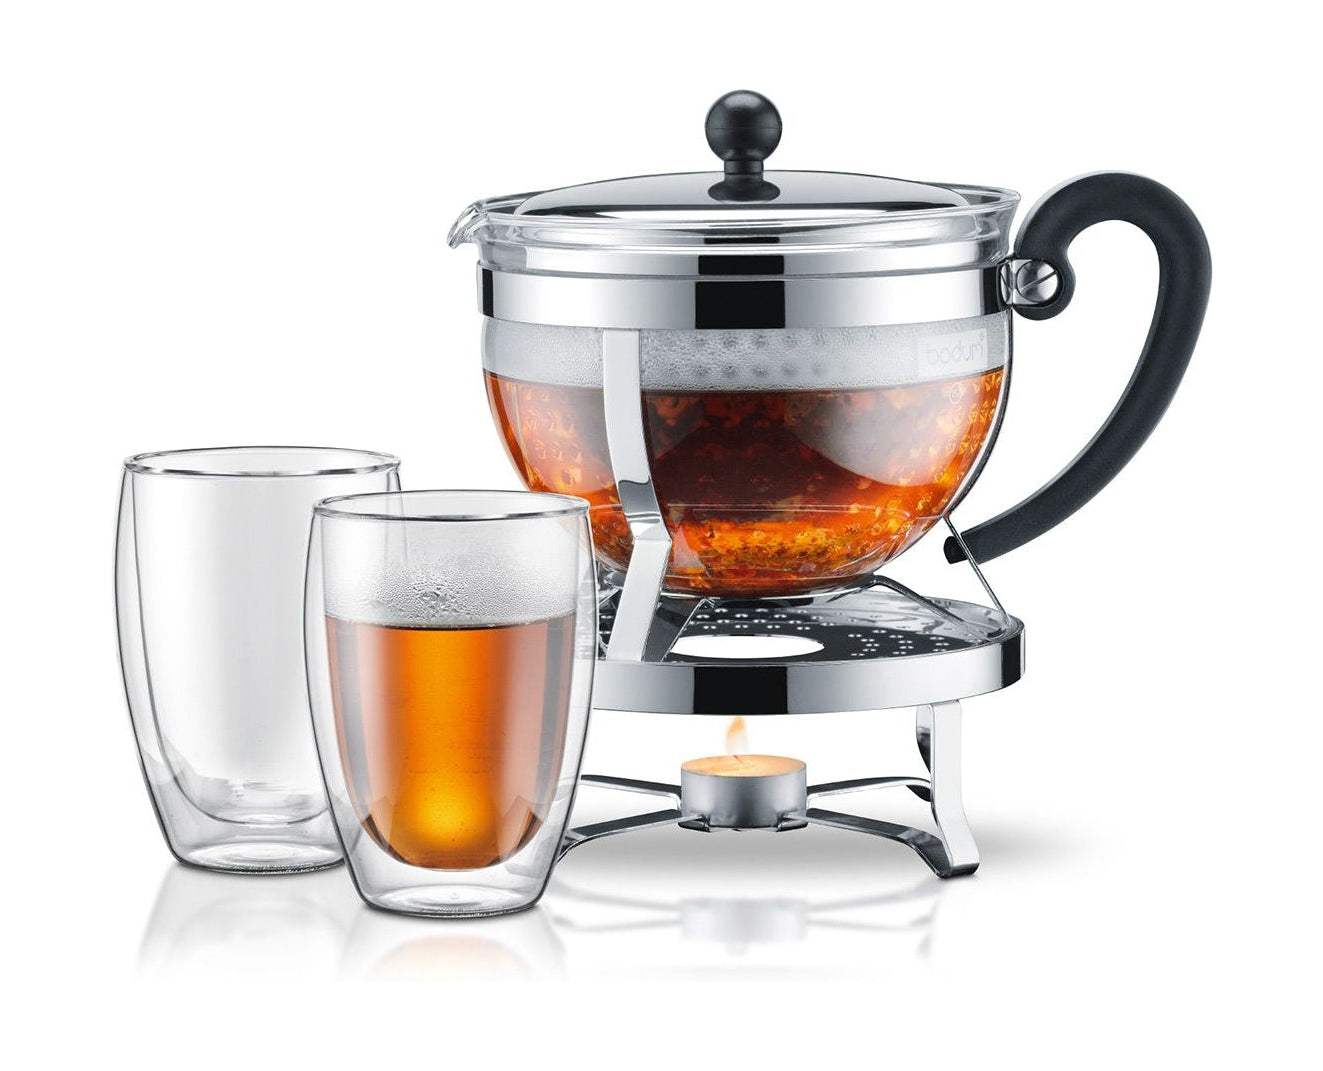 Bodum Chambord Set Tea Maker With Plastic Filter With Rechaud And 2 Double Walled Jars Chrome, 2 Pcs.